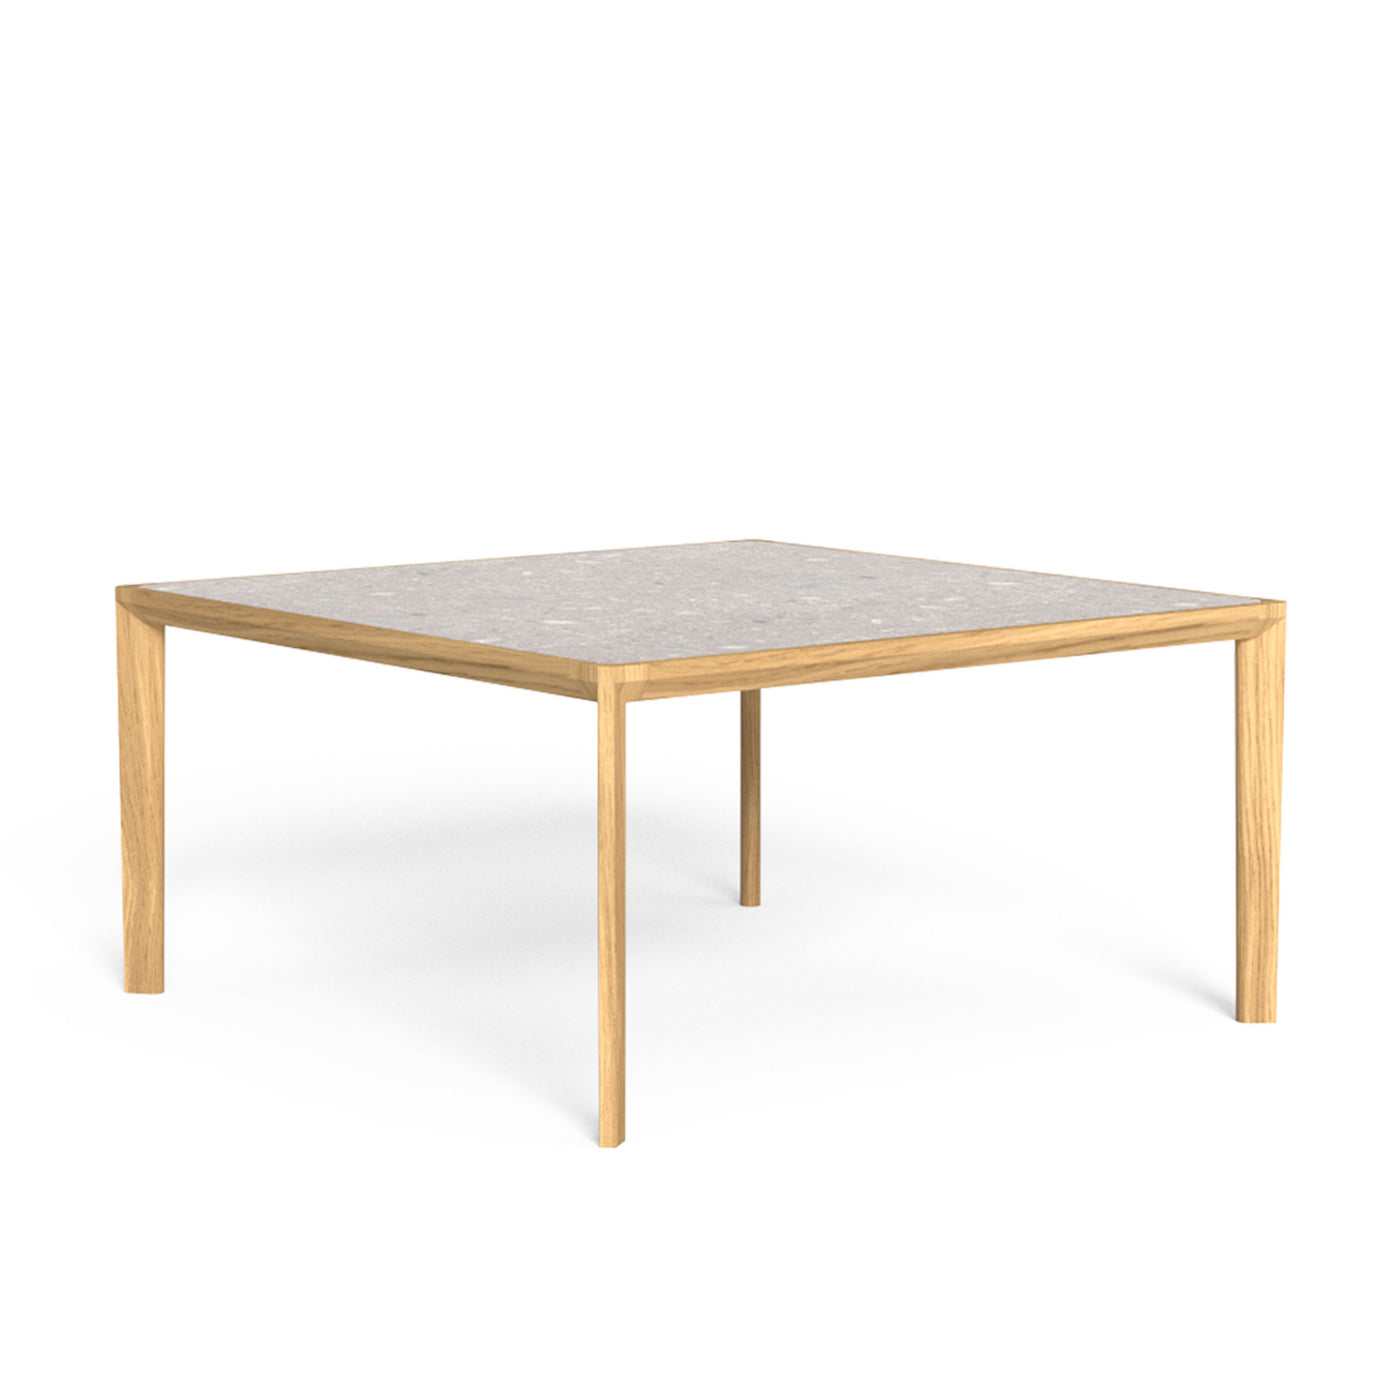 Outdoor Wood and Marble Dining Table CLEOSOFT/WOOD by Marco Acerbis for Talenti 01